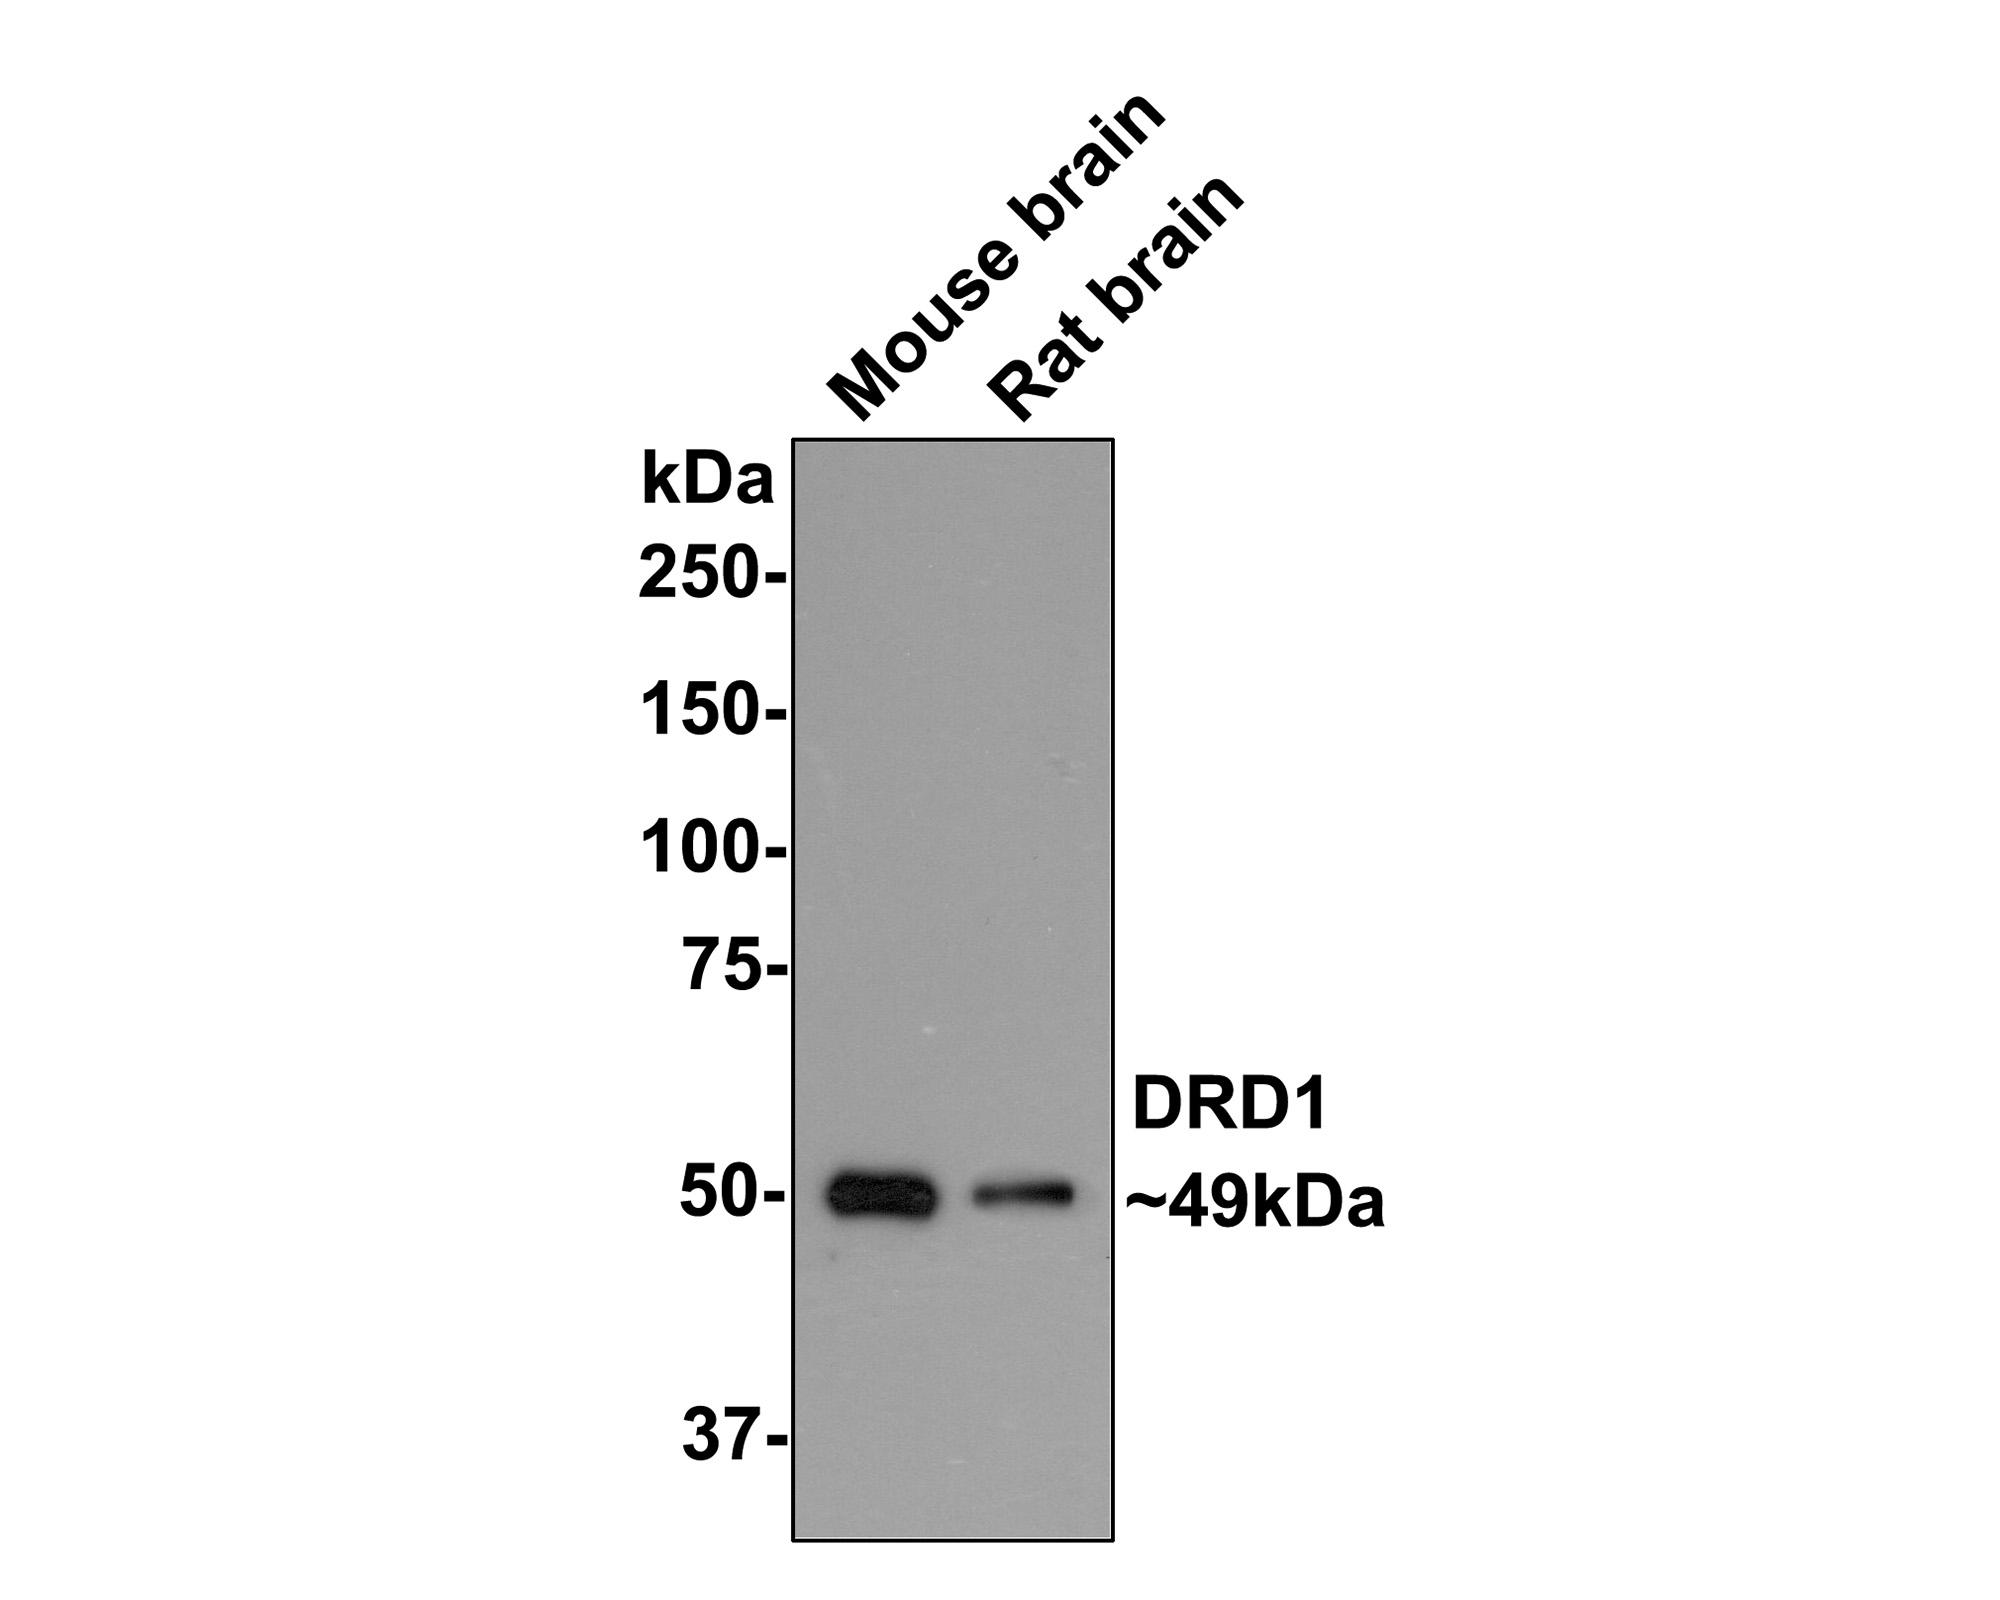 ICC staining of DRD1 in 293T cells (red). Formalin fixed cells were permeabilized with 0.1% Triton X-100 in TBS for 10 minutes at room temperature and blocked with 10% negative goat serum for 15 minutes at room temperature. Cells were probed with the primary antibody (ET1703-45, 1/50) for 1 hour at room temperature, washed with PBS. Alexa Fluor®594 conjugate-Goat anti-Rabbit IgG was used as the secondary antibody at 1/1,000 dilution. The nuclear counter stain is DAPI (blue).